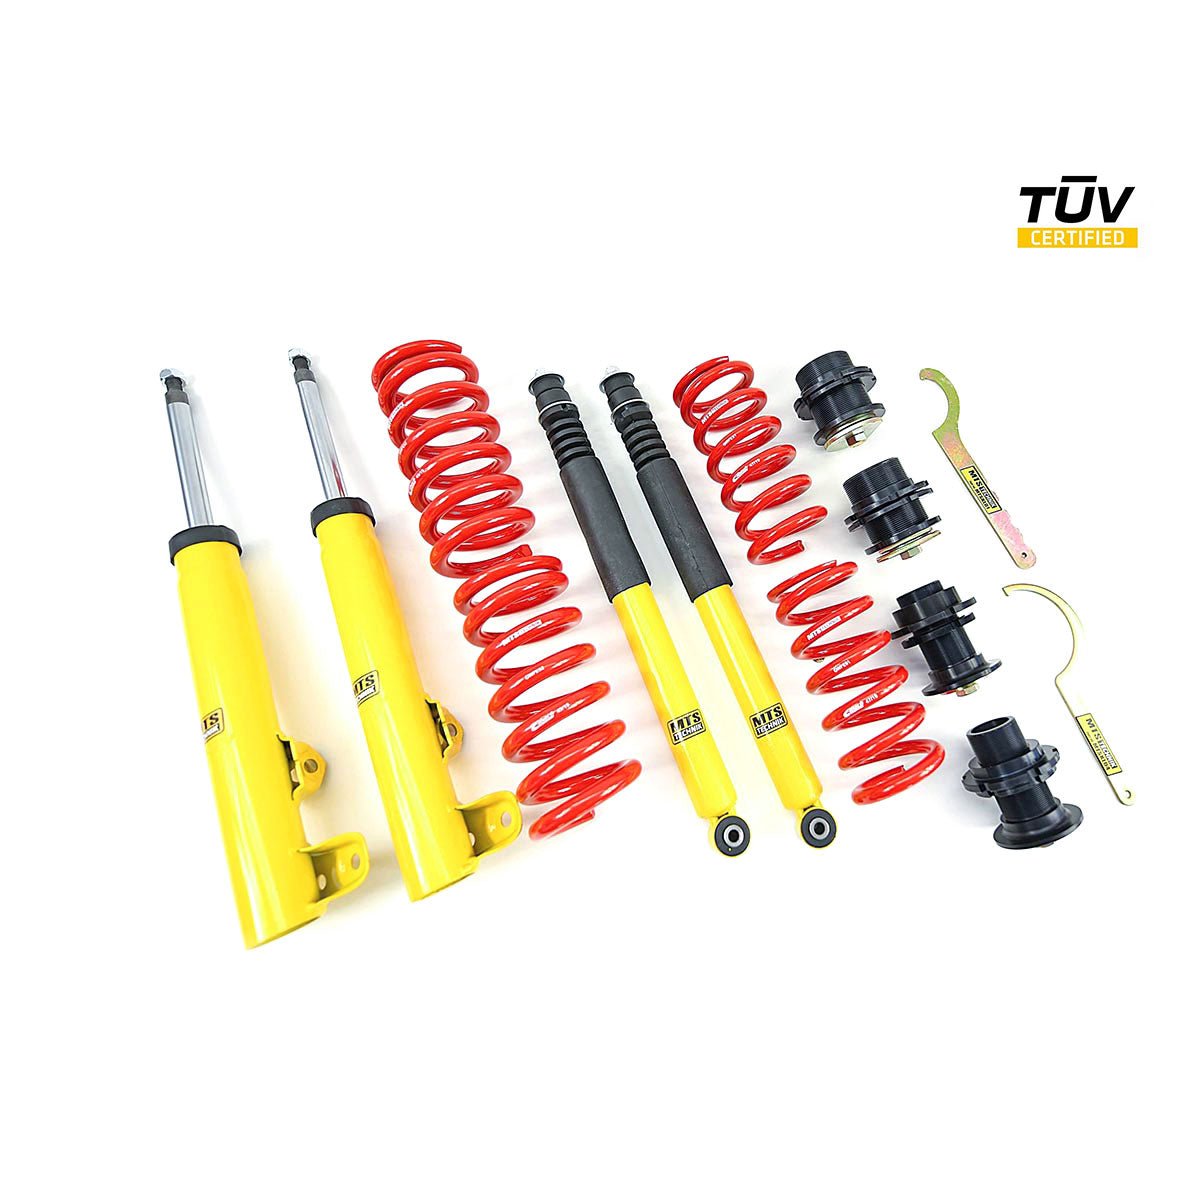 MTS TECHNIK coilover kit STREET Mercedes-Benz A124 (with TÜV) - PARTS33 GmbH